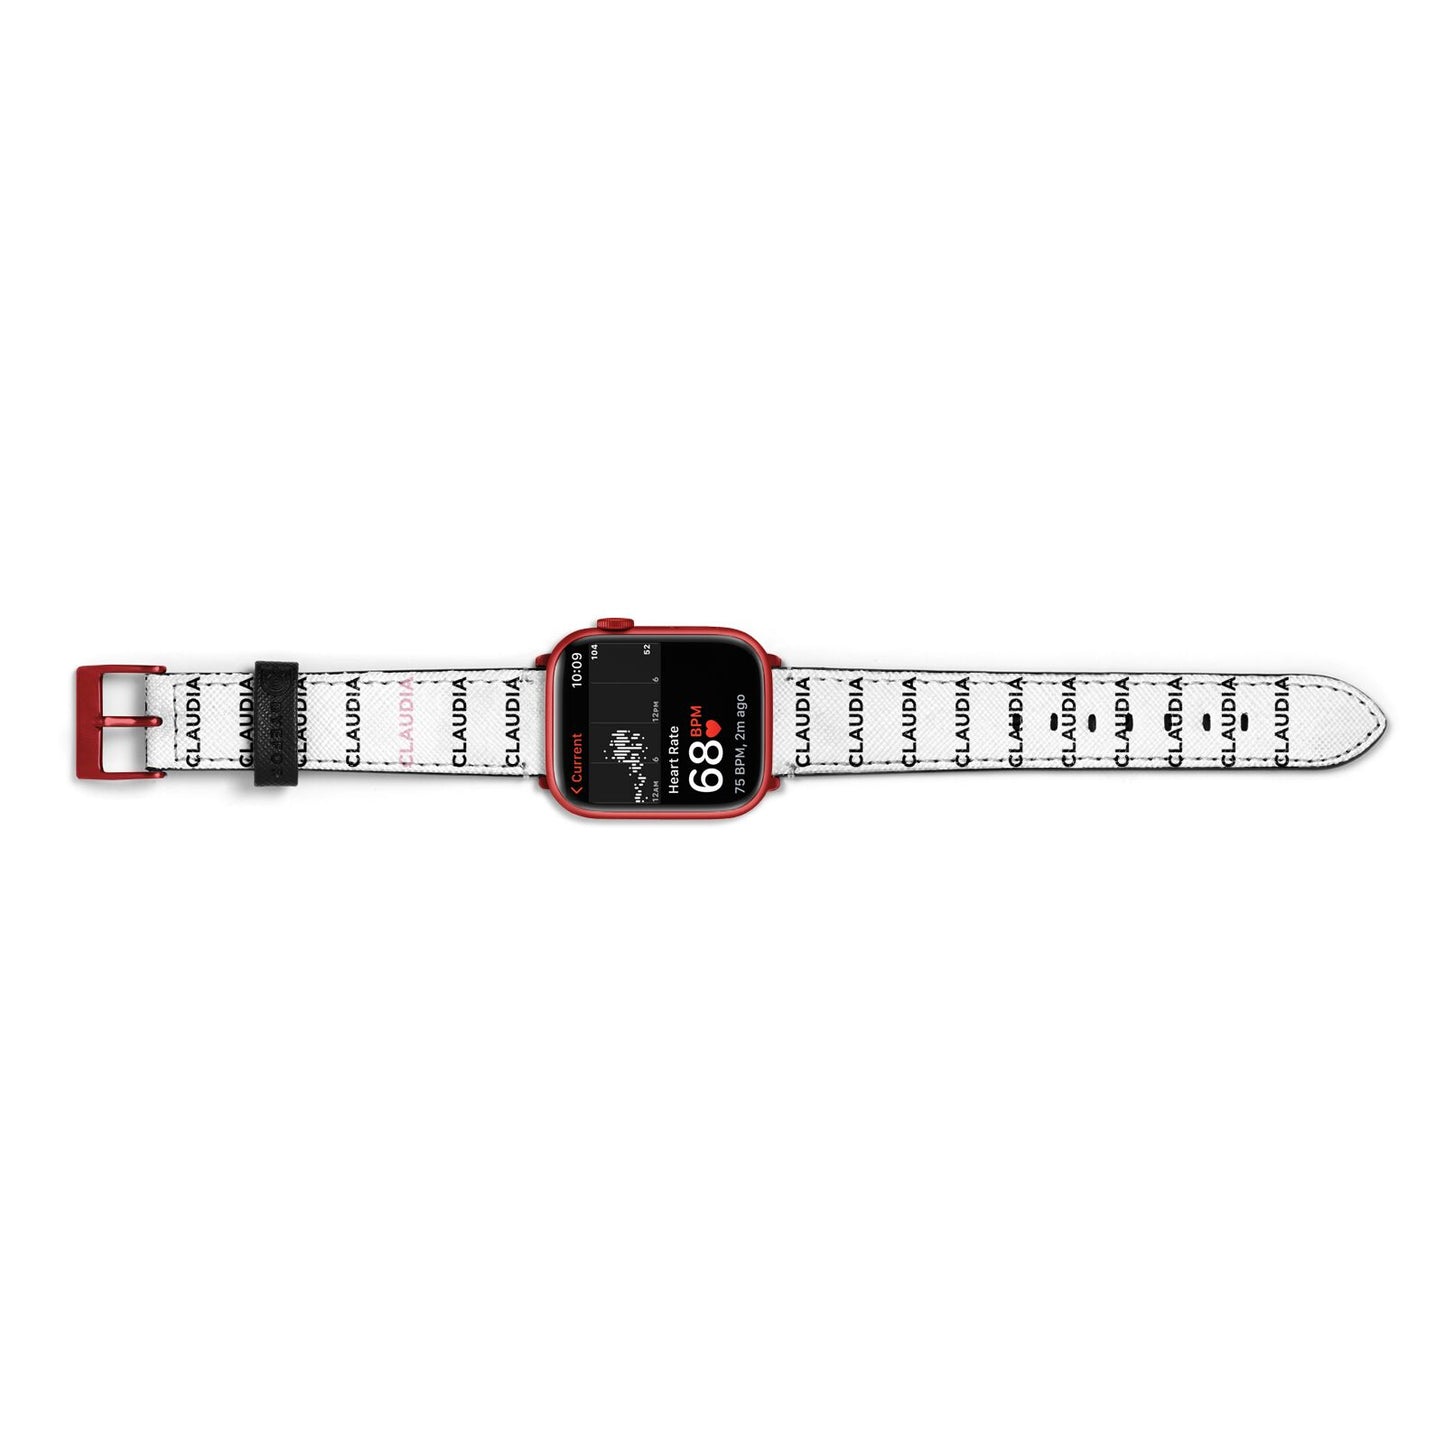 Custom Name Repeat Apple Watch Strap Size 38mm Landscape Image Red Hardware